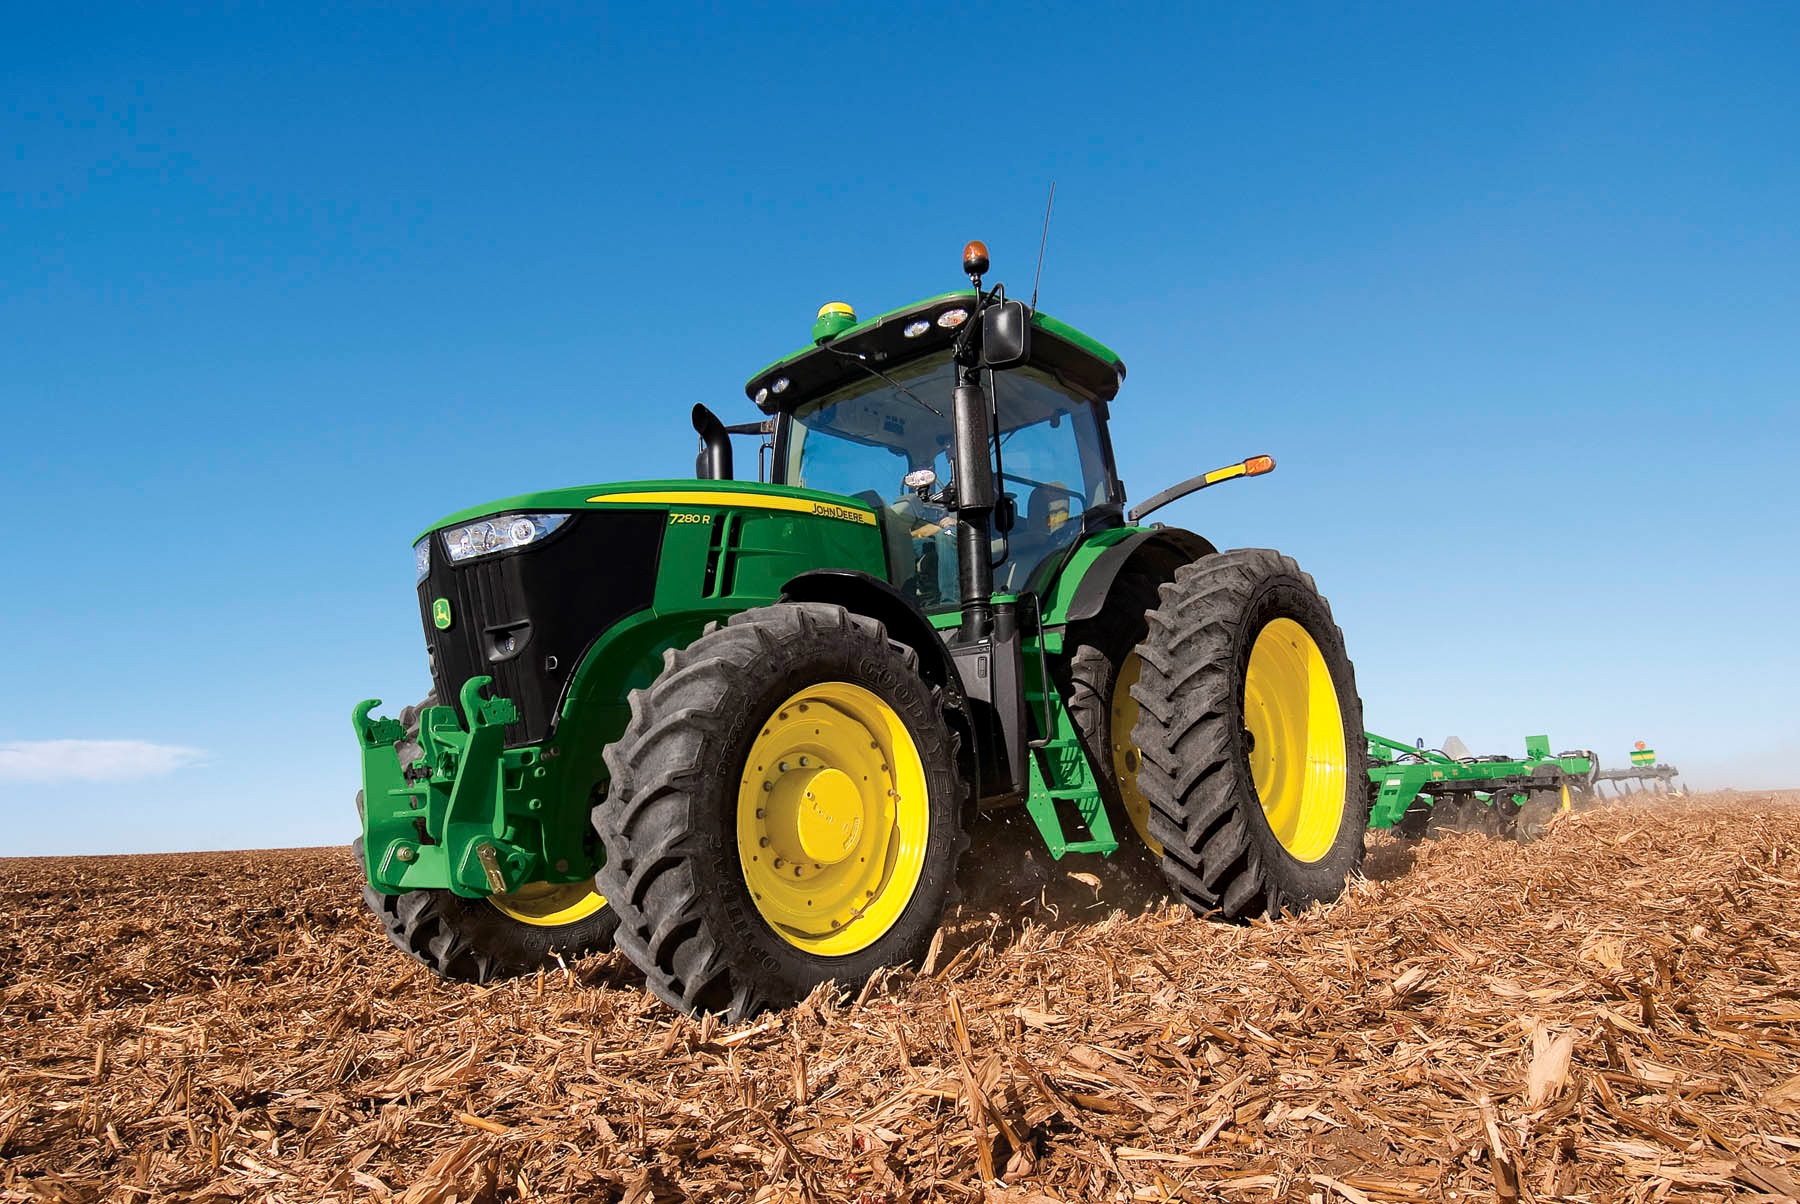 John Deere 7280R Awarded Tractor of the Year for 2012 at Agritechnica ...